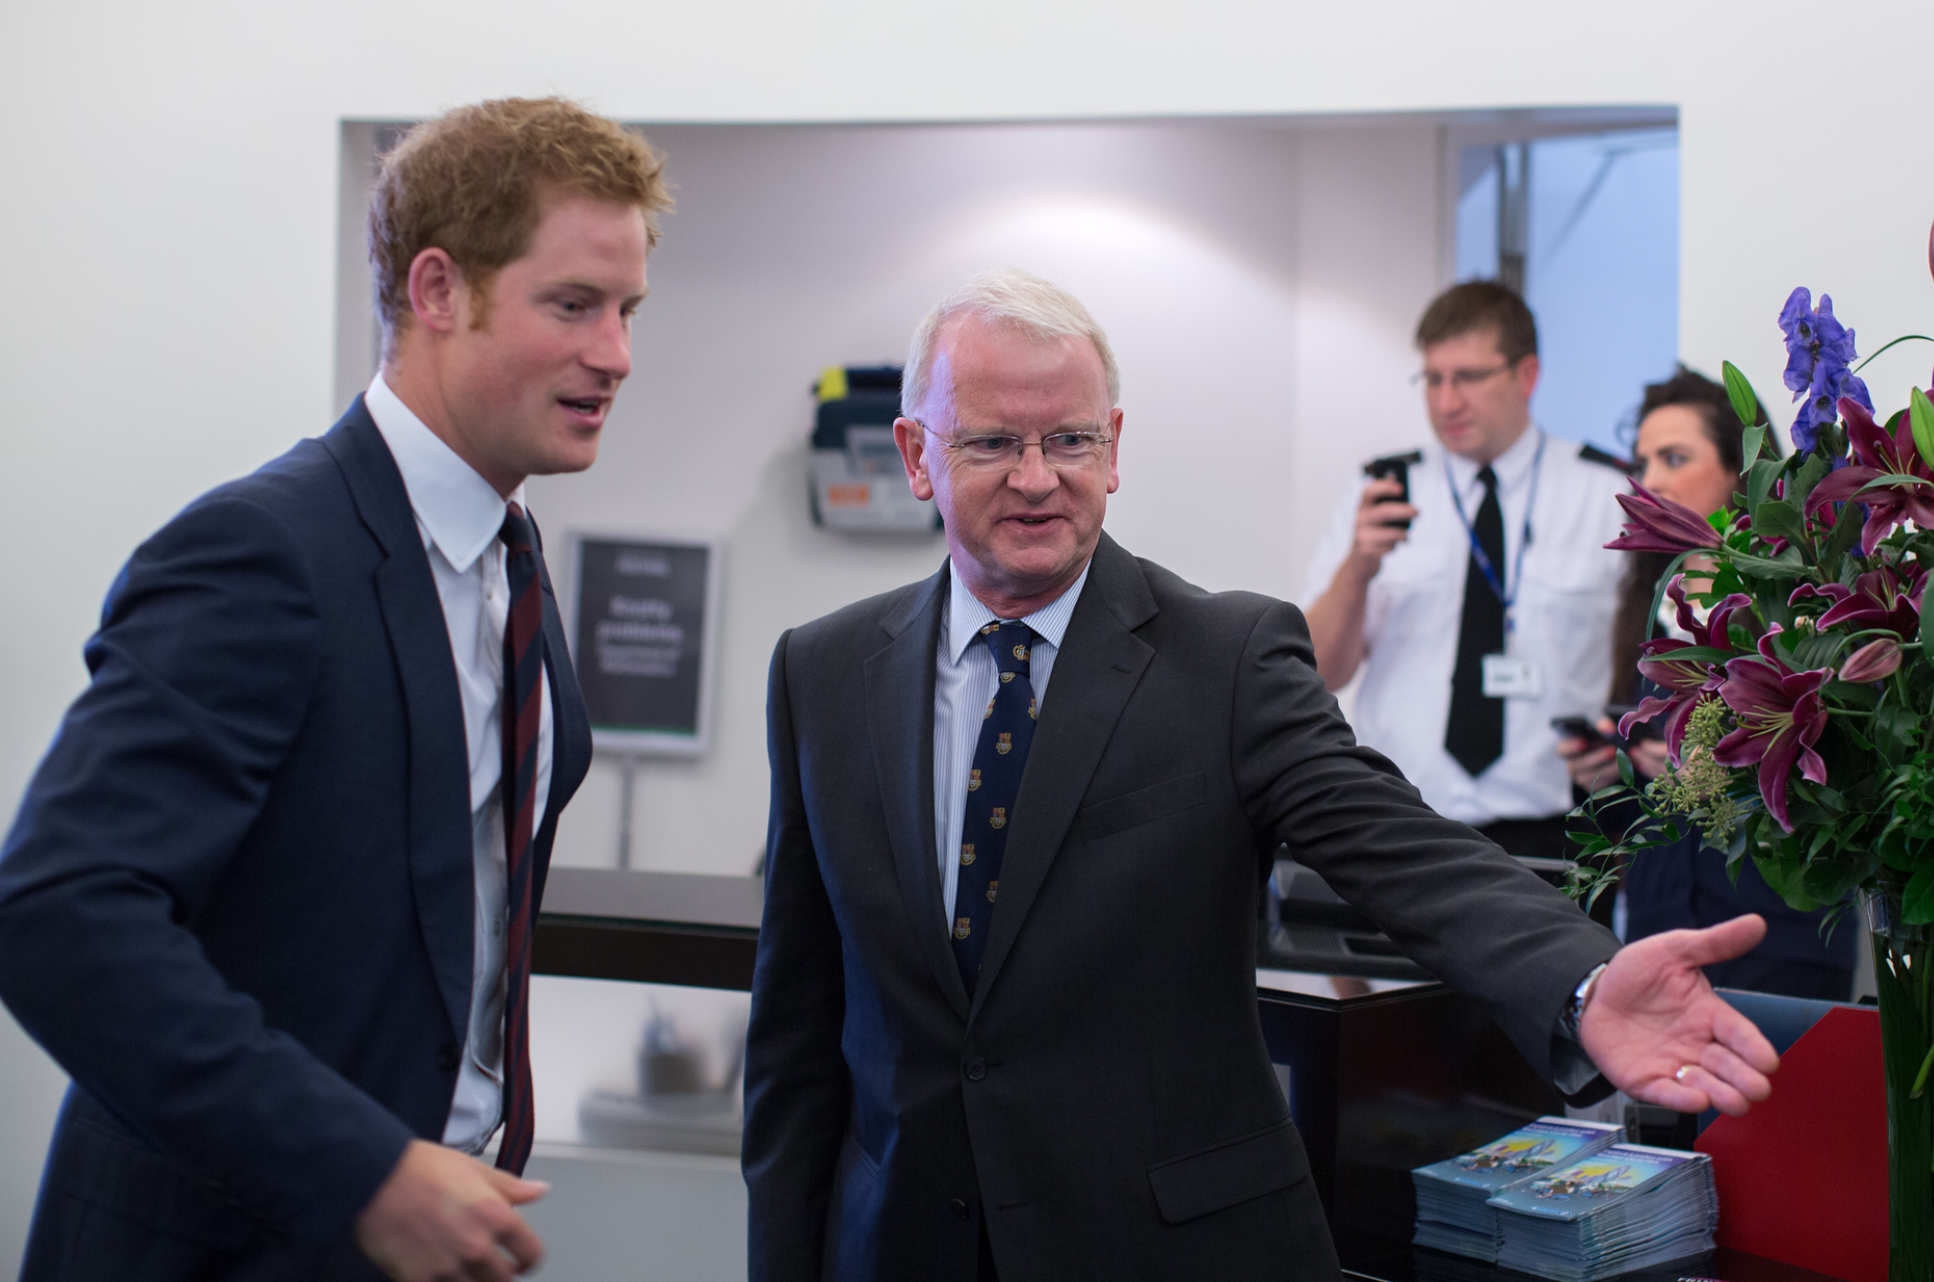 Discussing blast injury research with Prince Harry